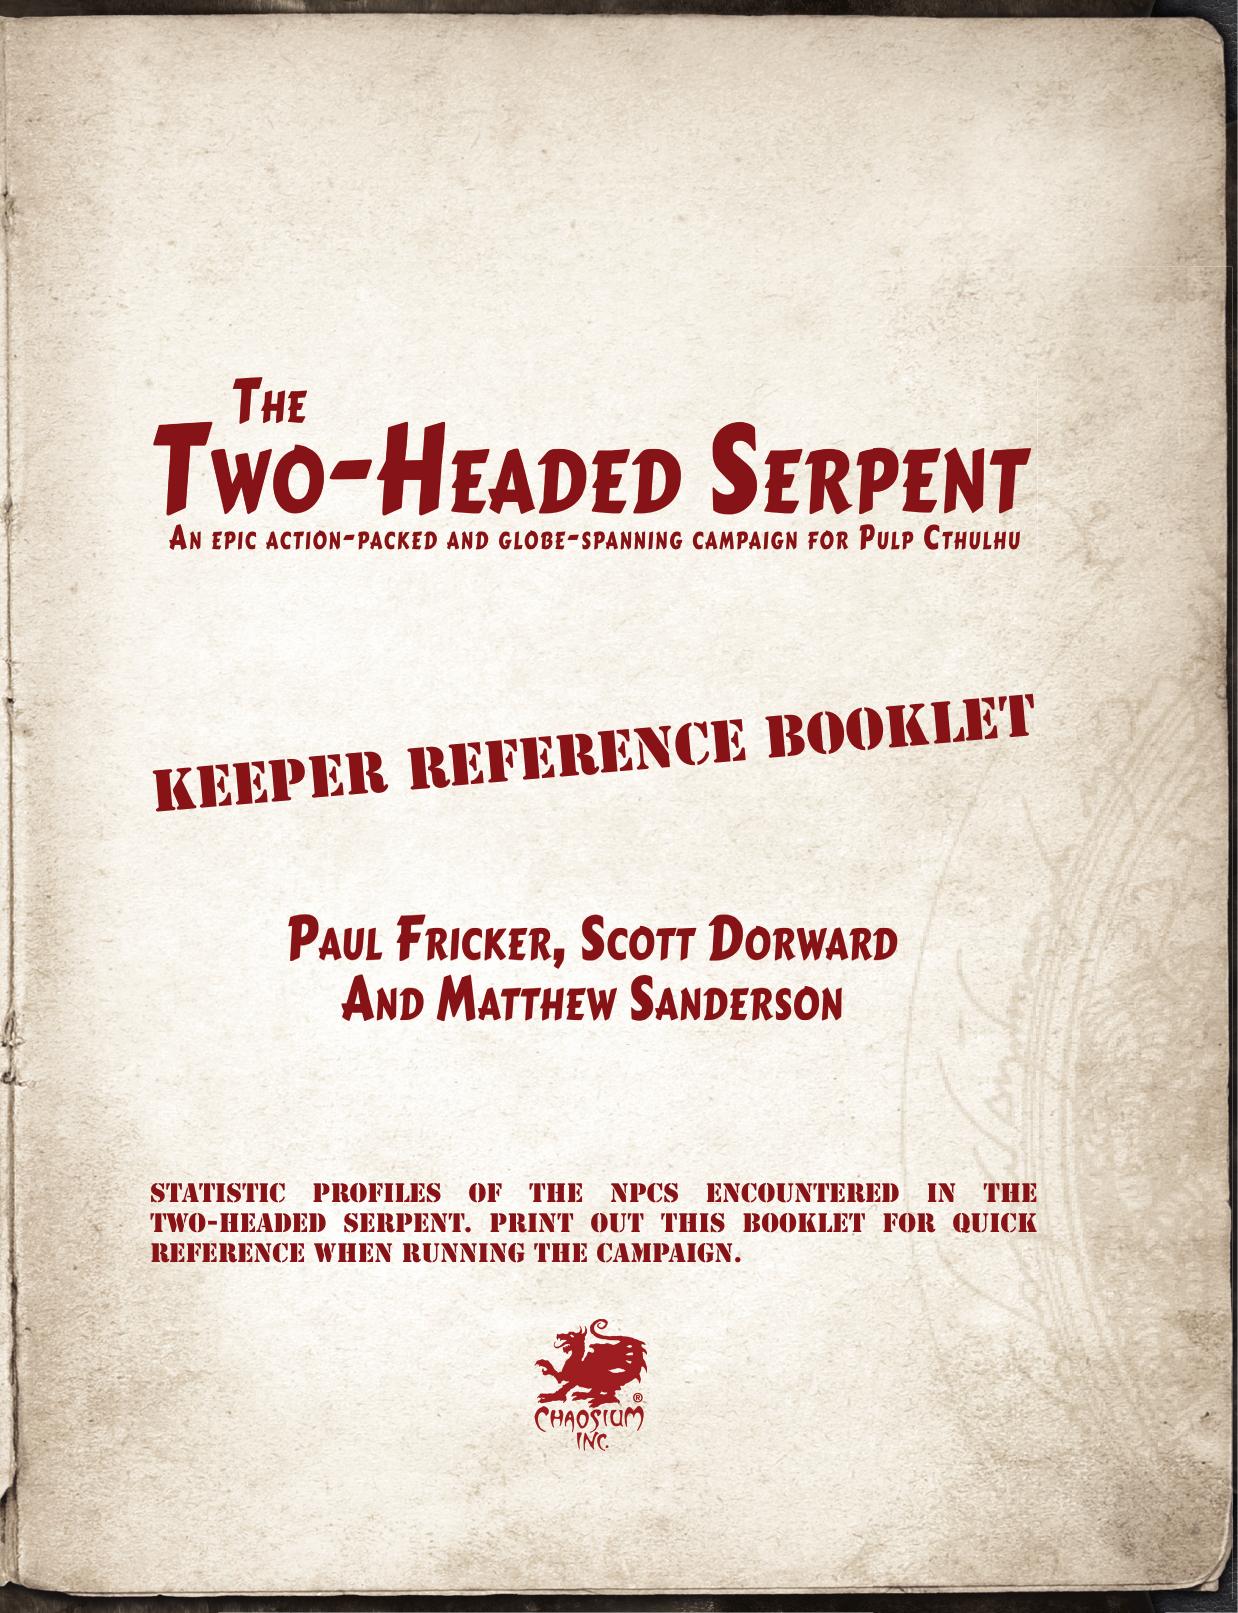 The Two-Headed Serpent Keeper Reference Booklet.indd